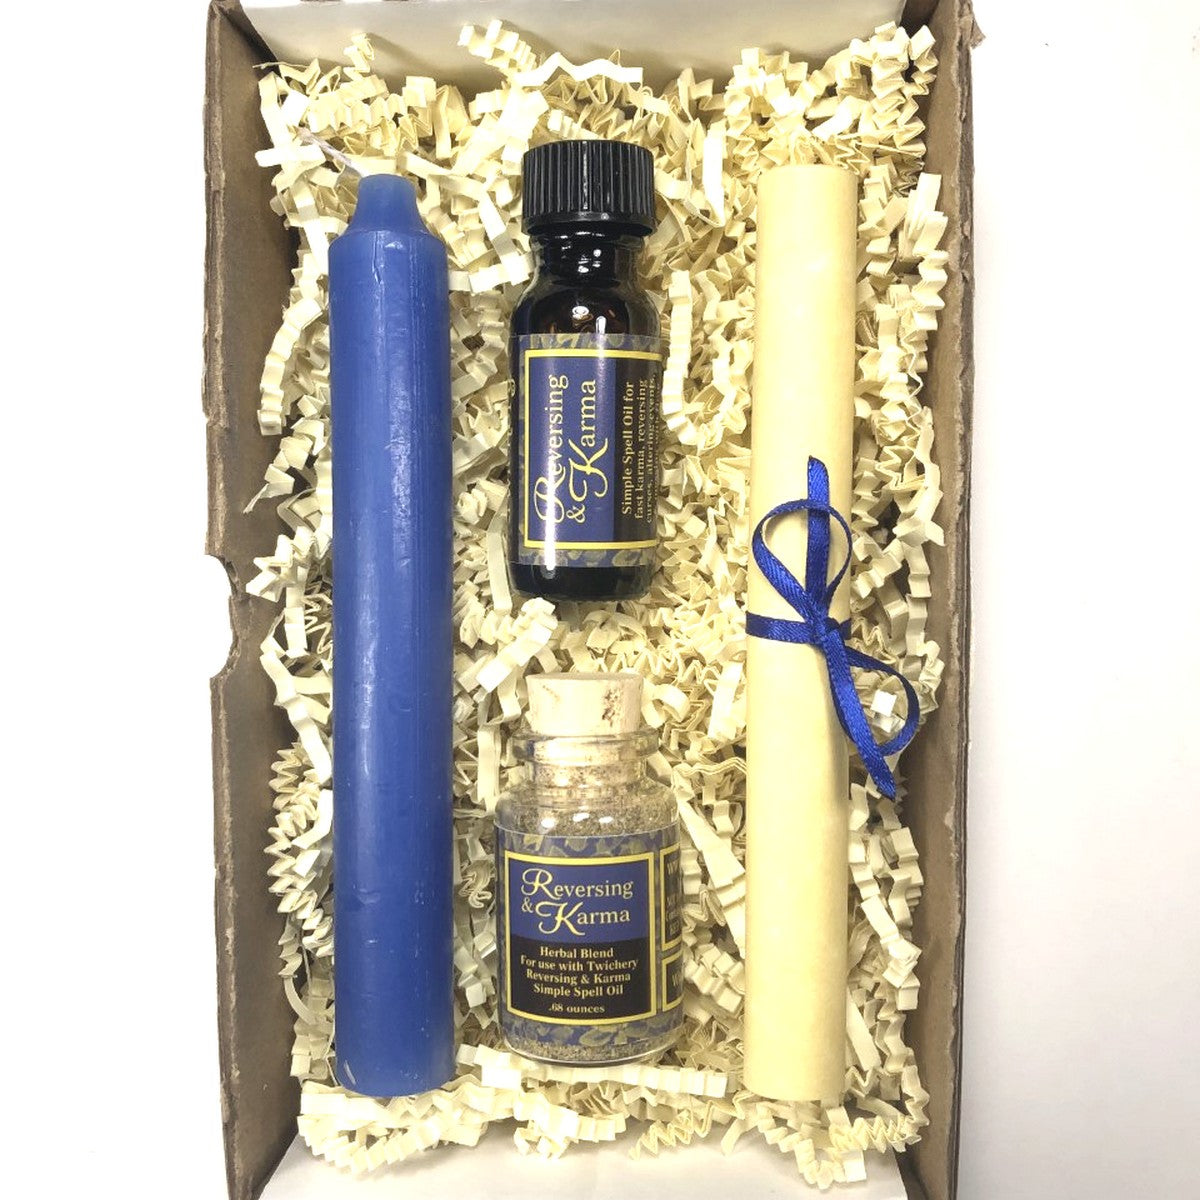 Your Twichery Reversing & Karma Simple Spell Kit comes with simple and complete instructions and beautifully packaged for gift-giving purposes